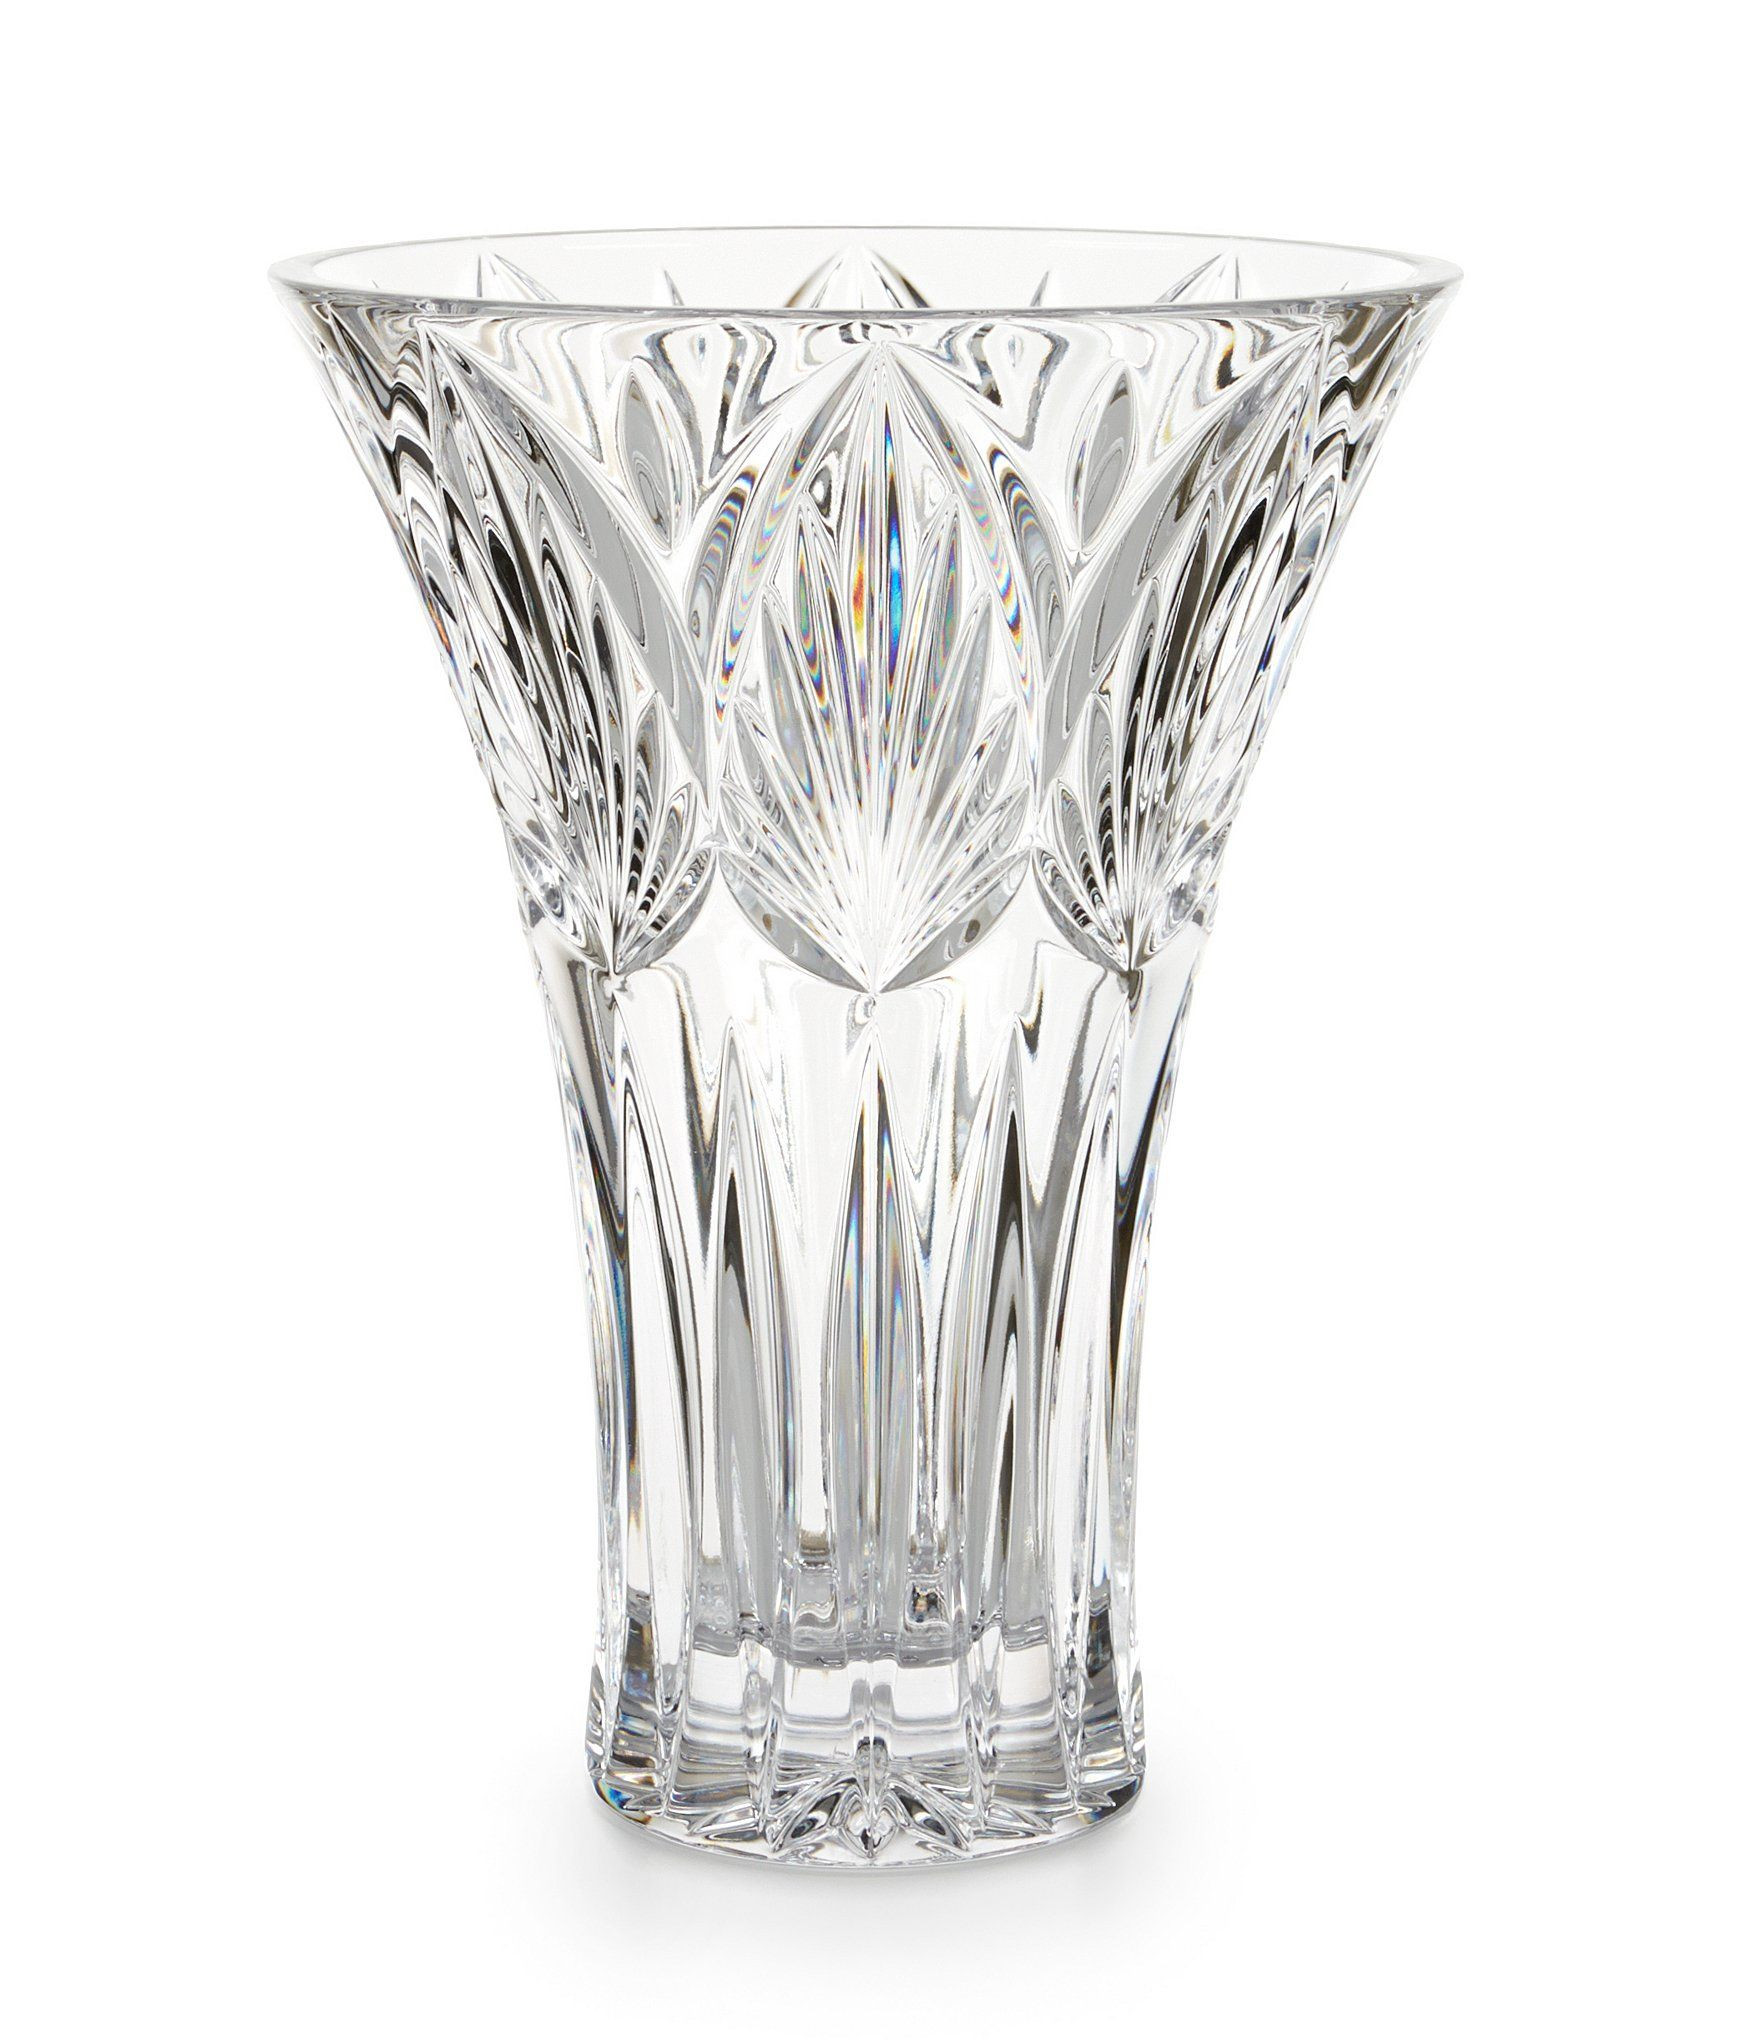 15 Stunning Fluted Glass Vase 2024 free download fluted glass vase of waterford westbridge crystal vase crystal vase dillards and crystals in waterford westbridge crystal vase dillards